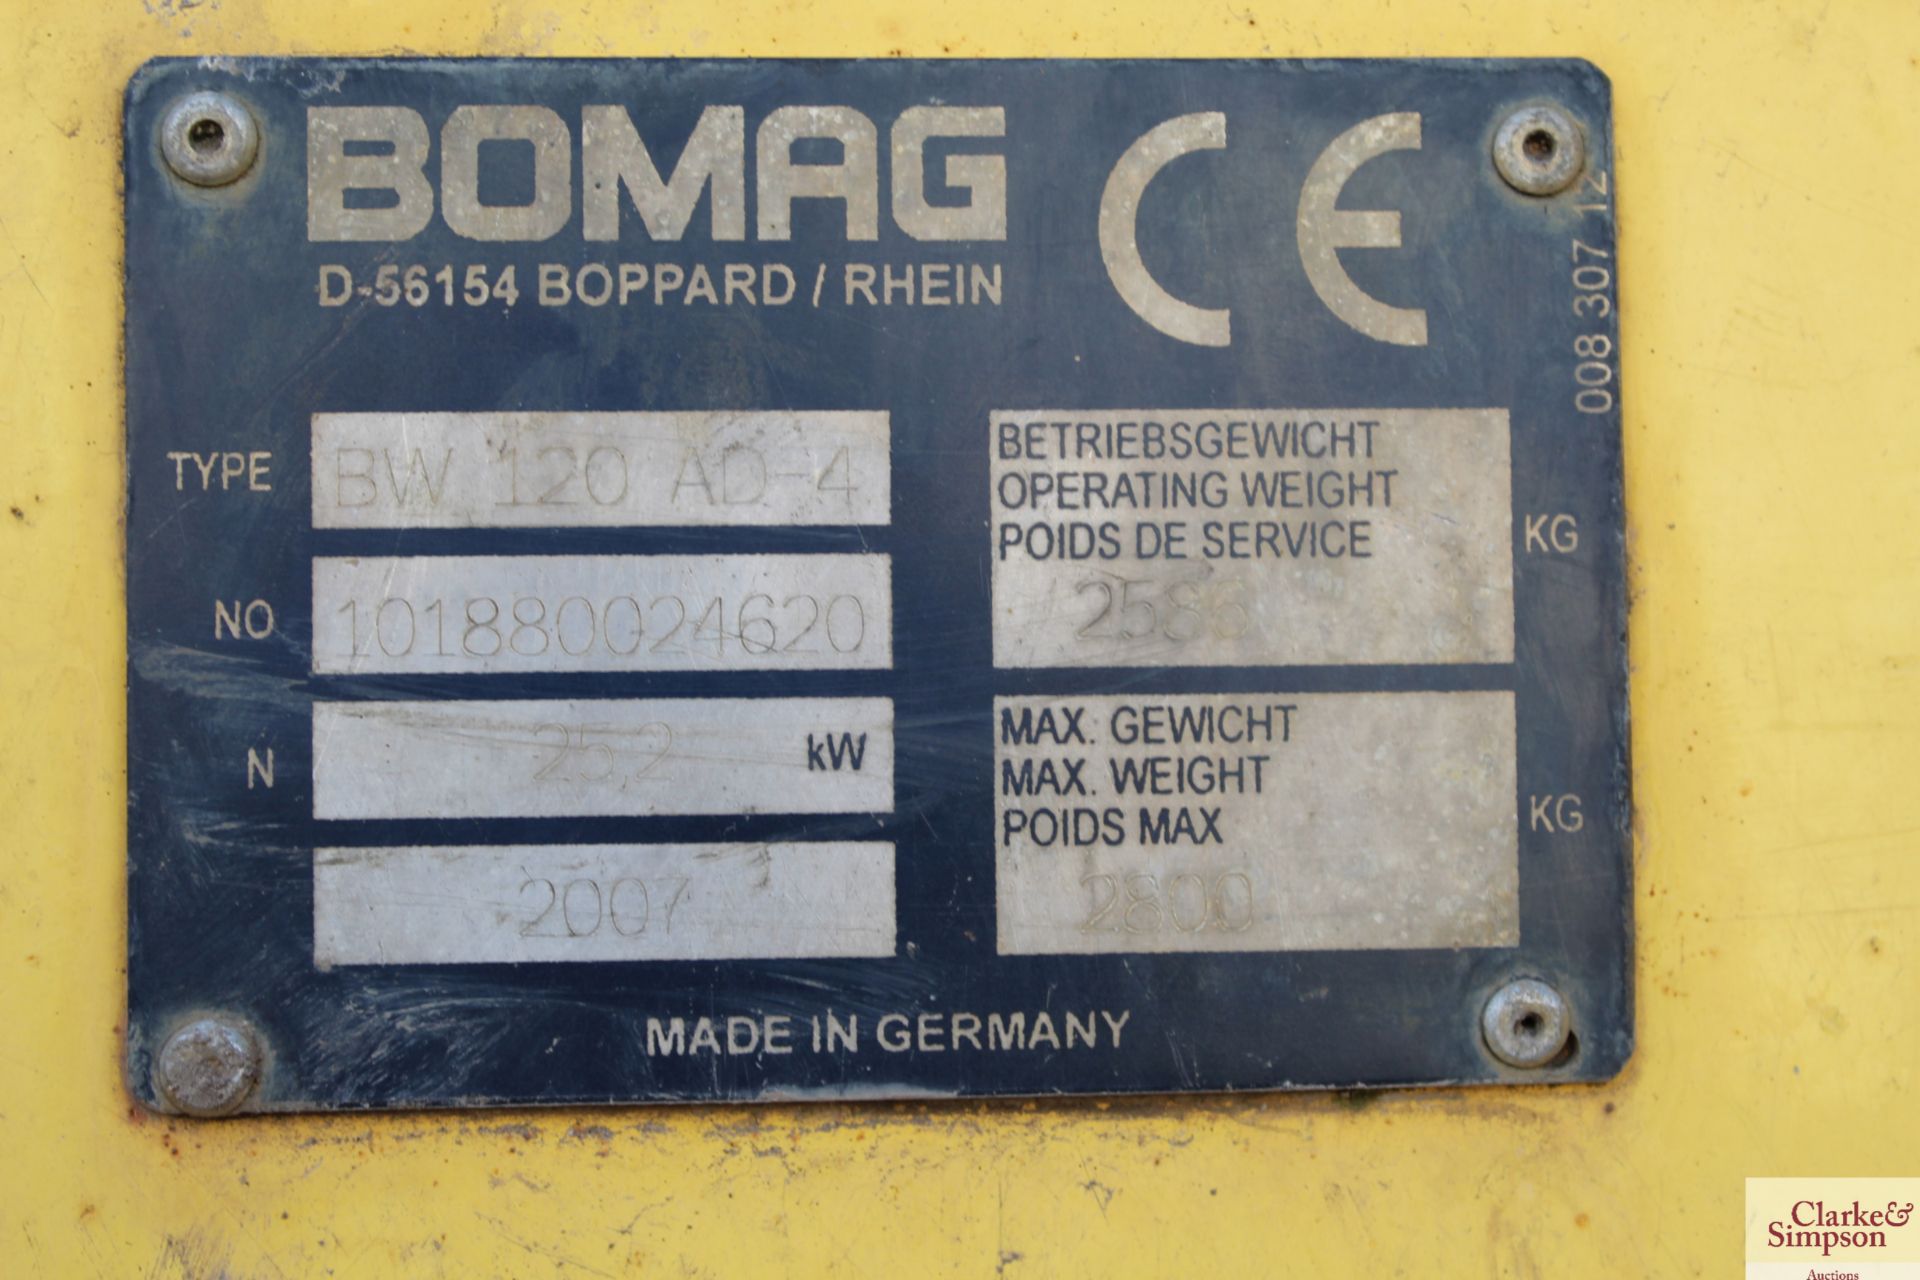 Bomag BW 120 AD-4 double drum roller. 2007. 1,346 hours. Serial number 101880024620. Owned from new. - Image 11 of 11